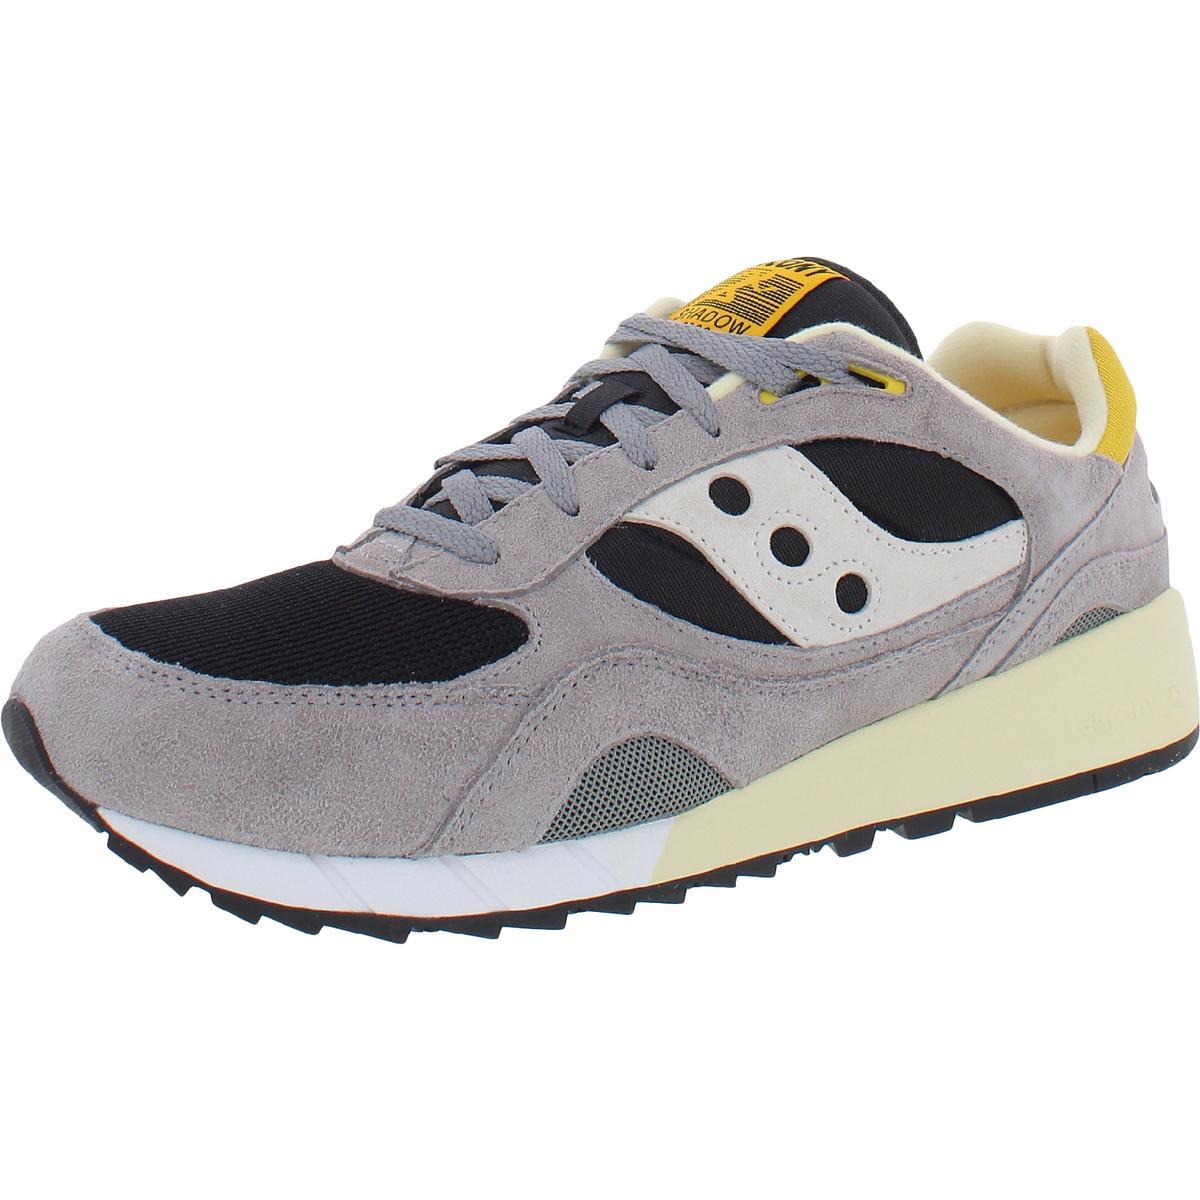 Saucony Men`s Shadow 6000 Leather Retro Inspired Athletic Fashion Sneaker Grey/Black